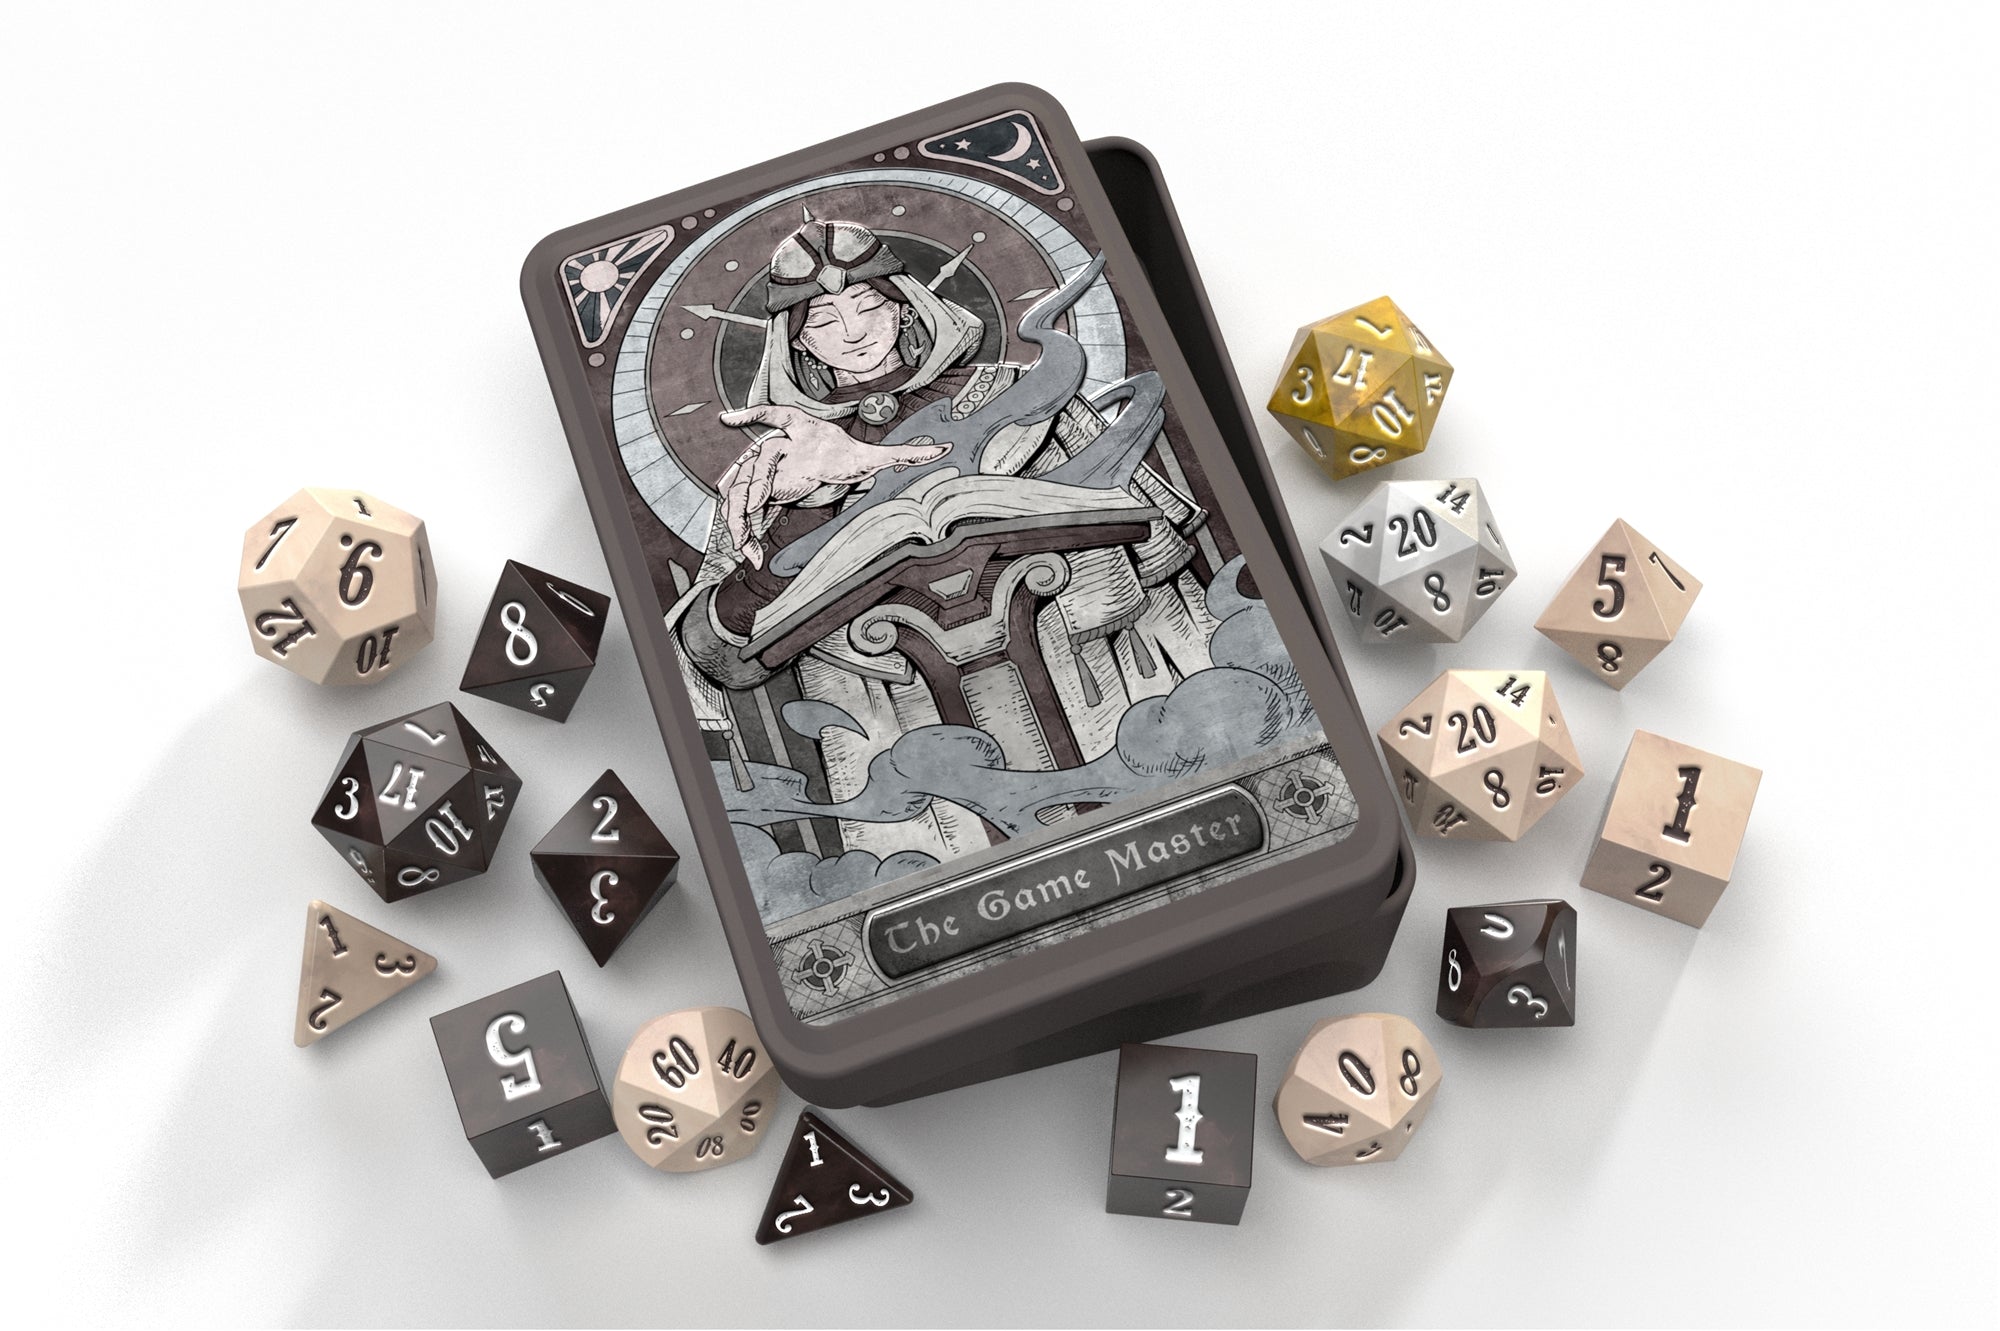 Beadle & Grimm's Dice Set - The Game Master